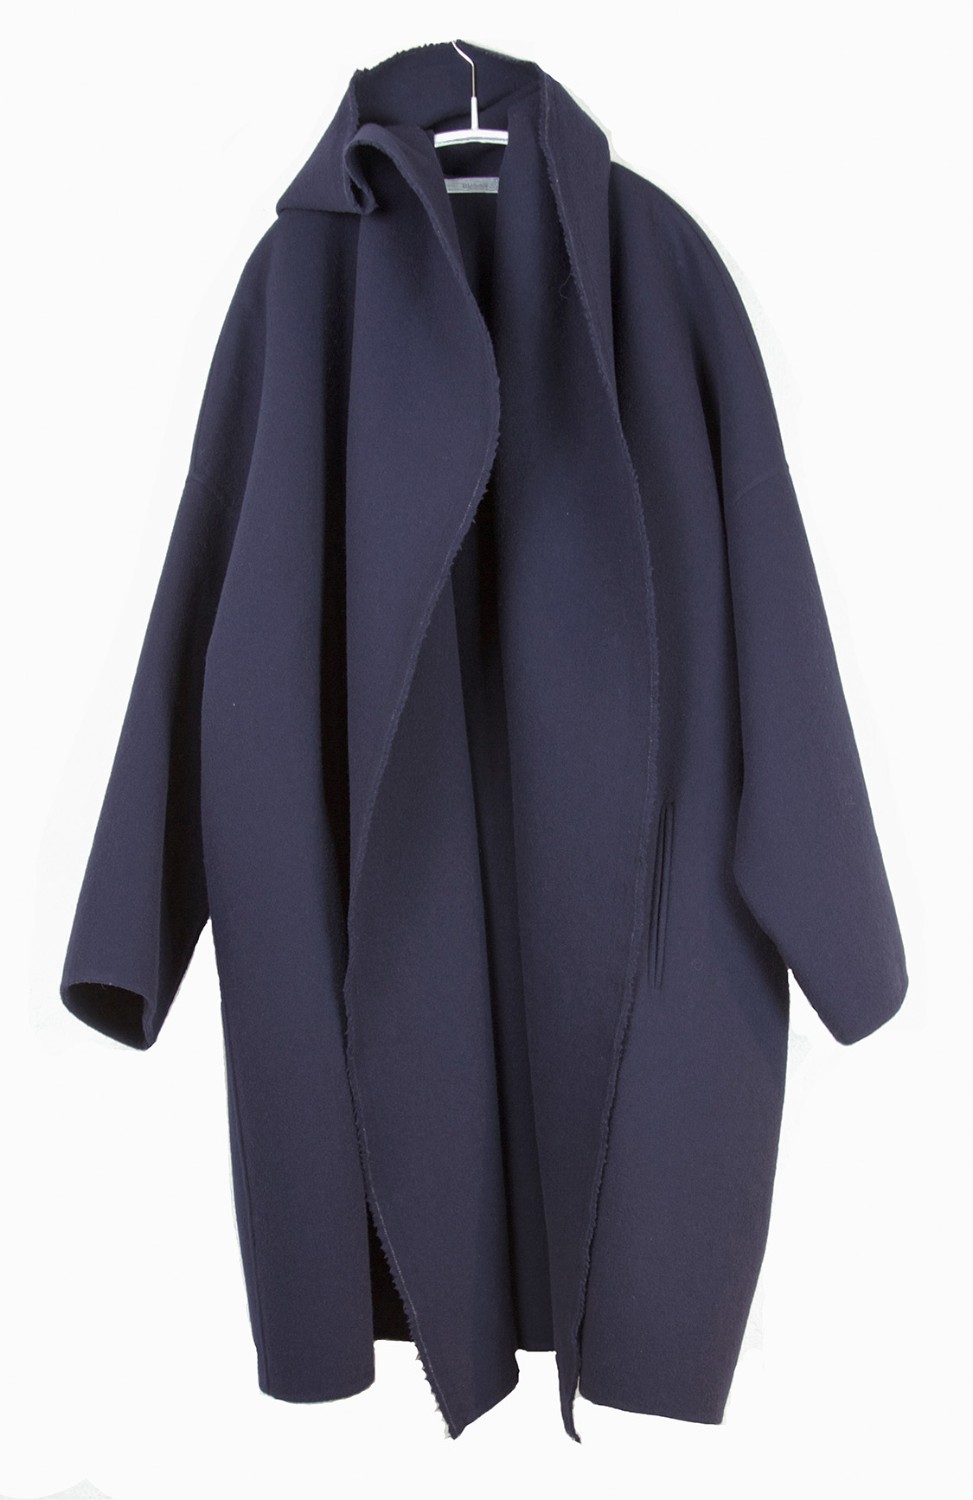 shop Dusan  Cappotti: Coat Dusan in 100% wool, blue, with hood, very confortable. number 759